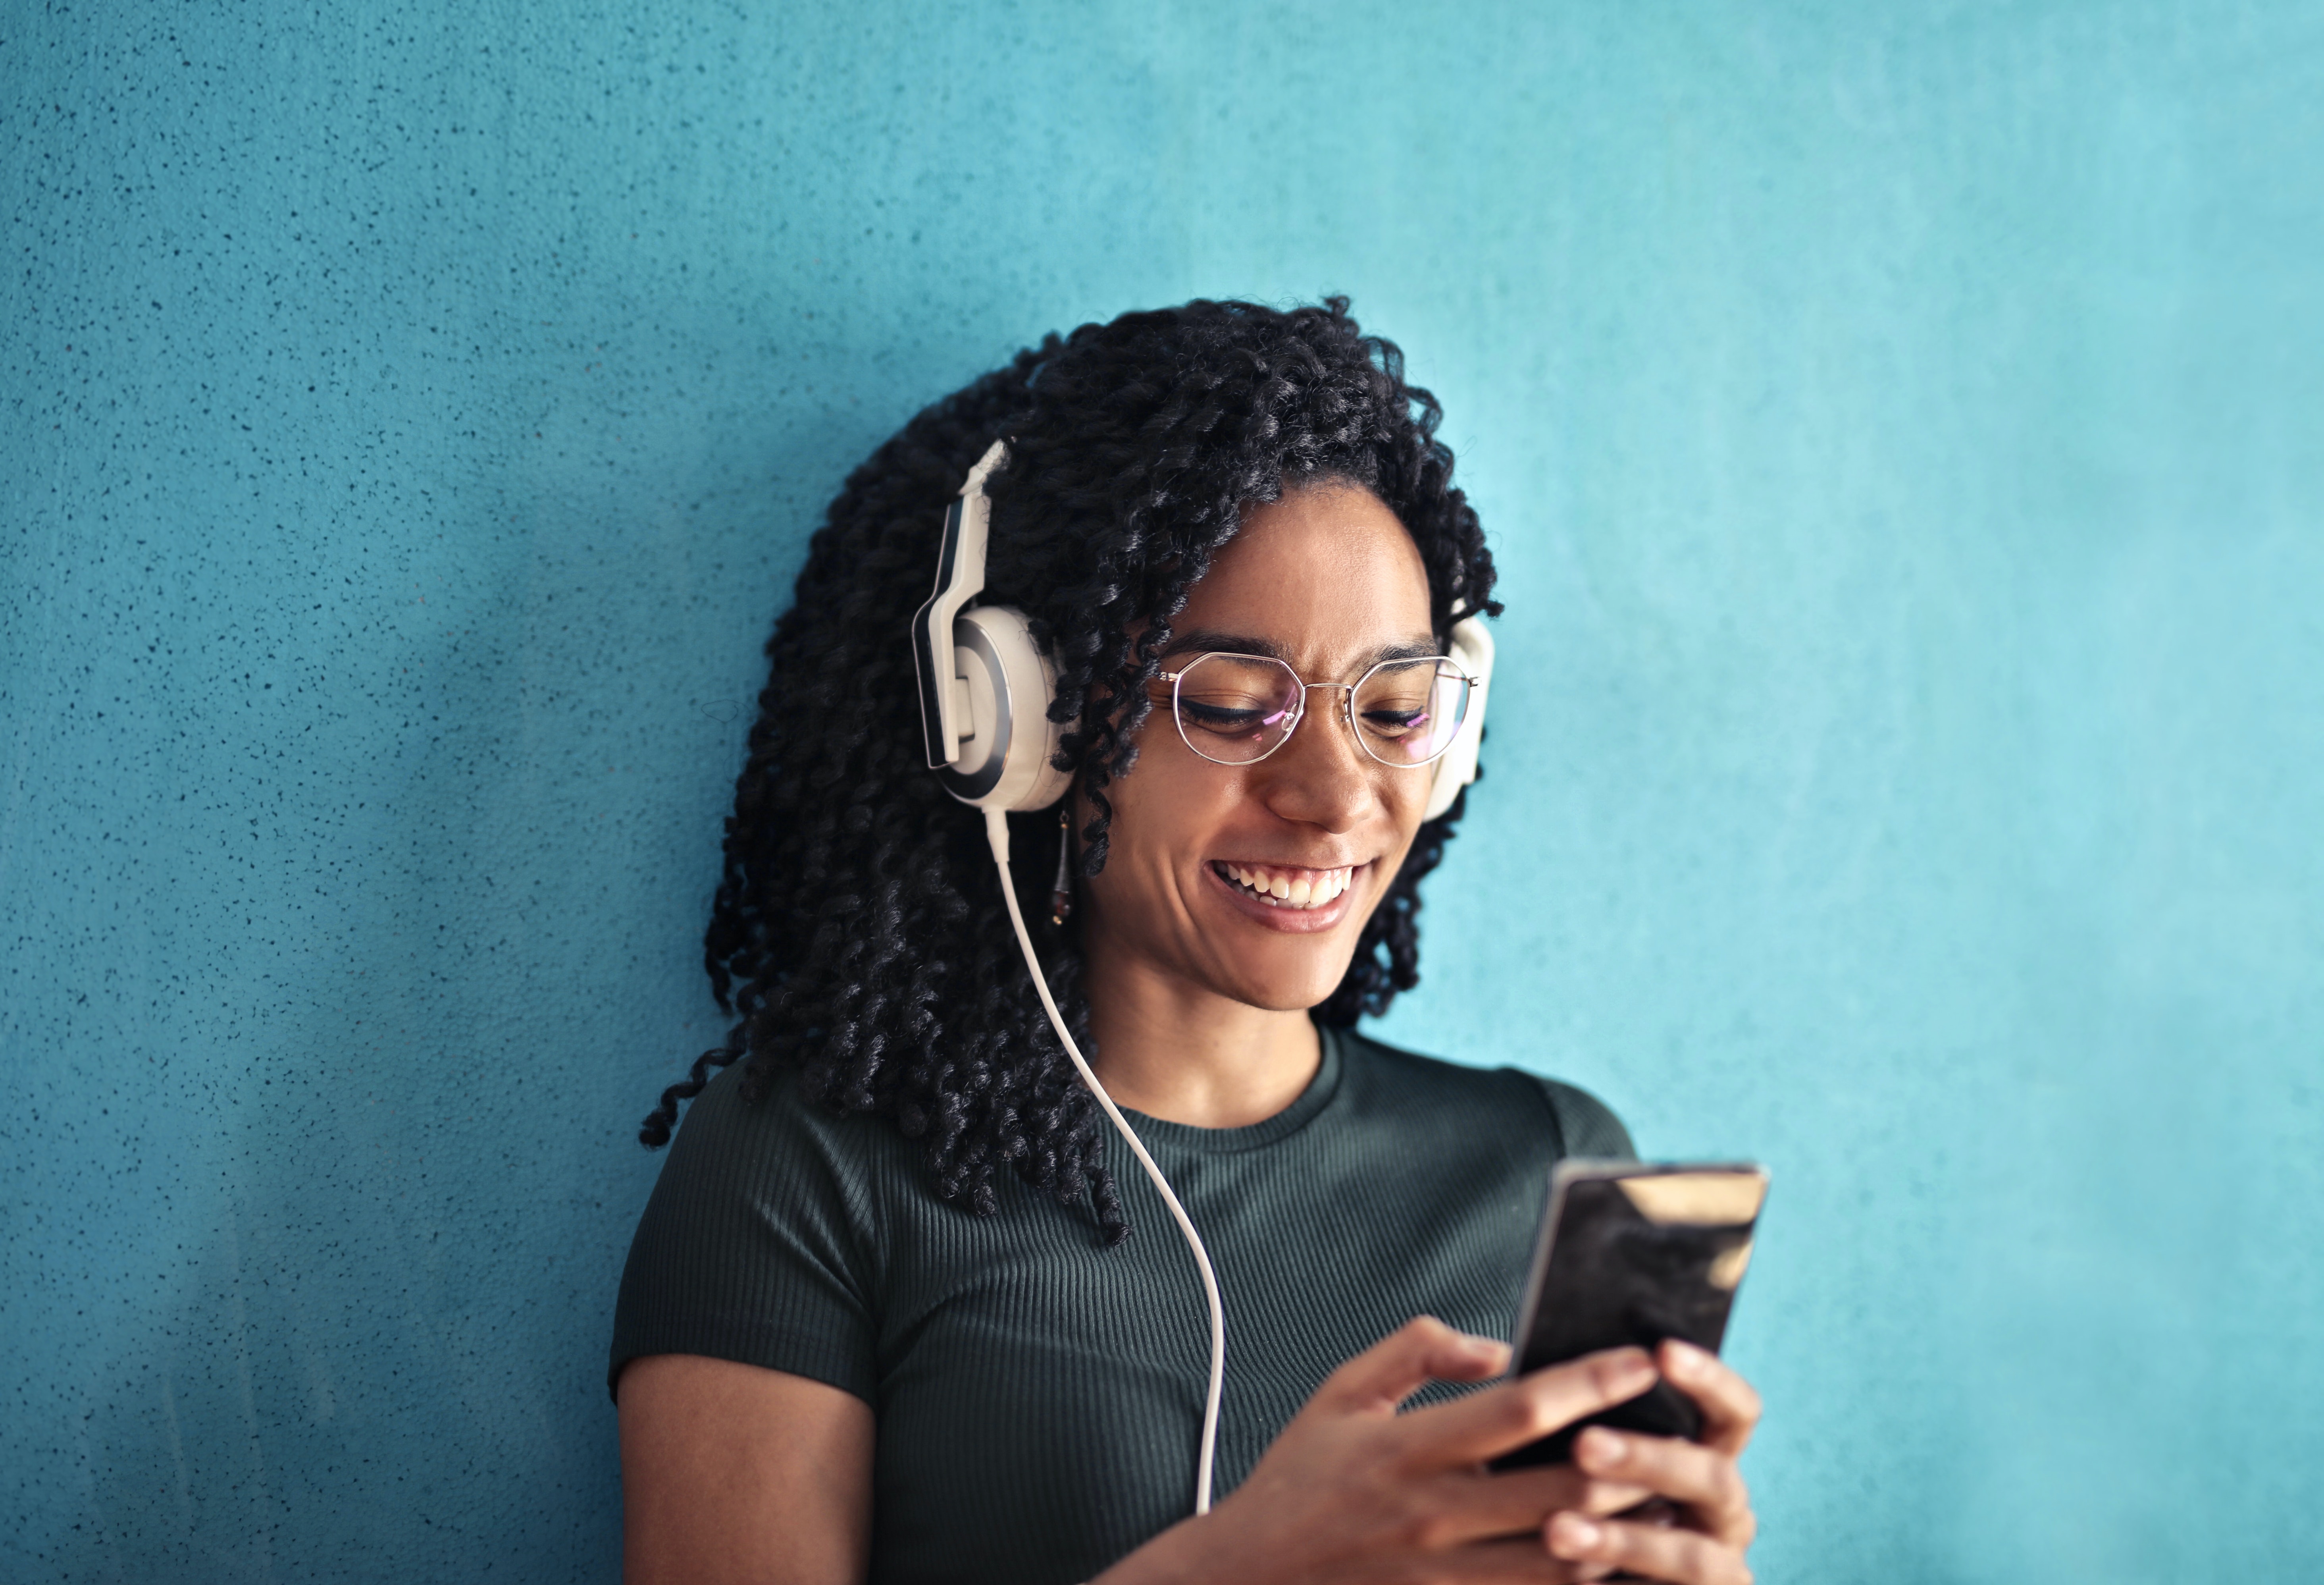 Top 7 Podcasts for College Students